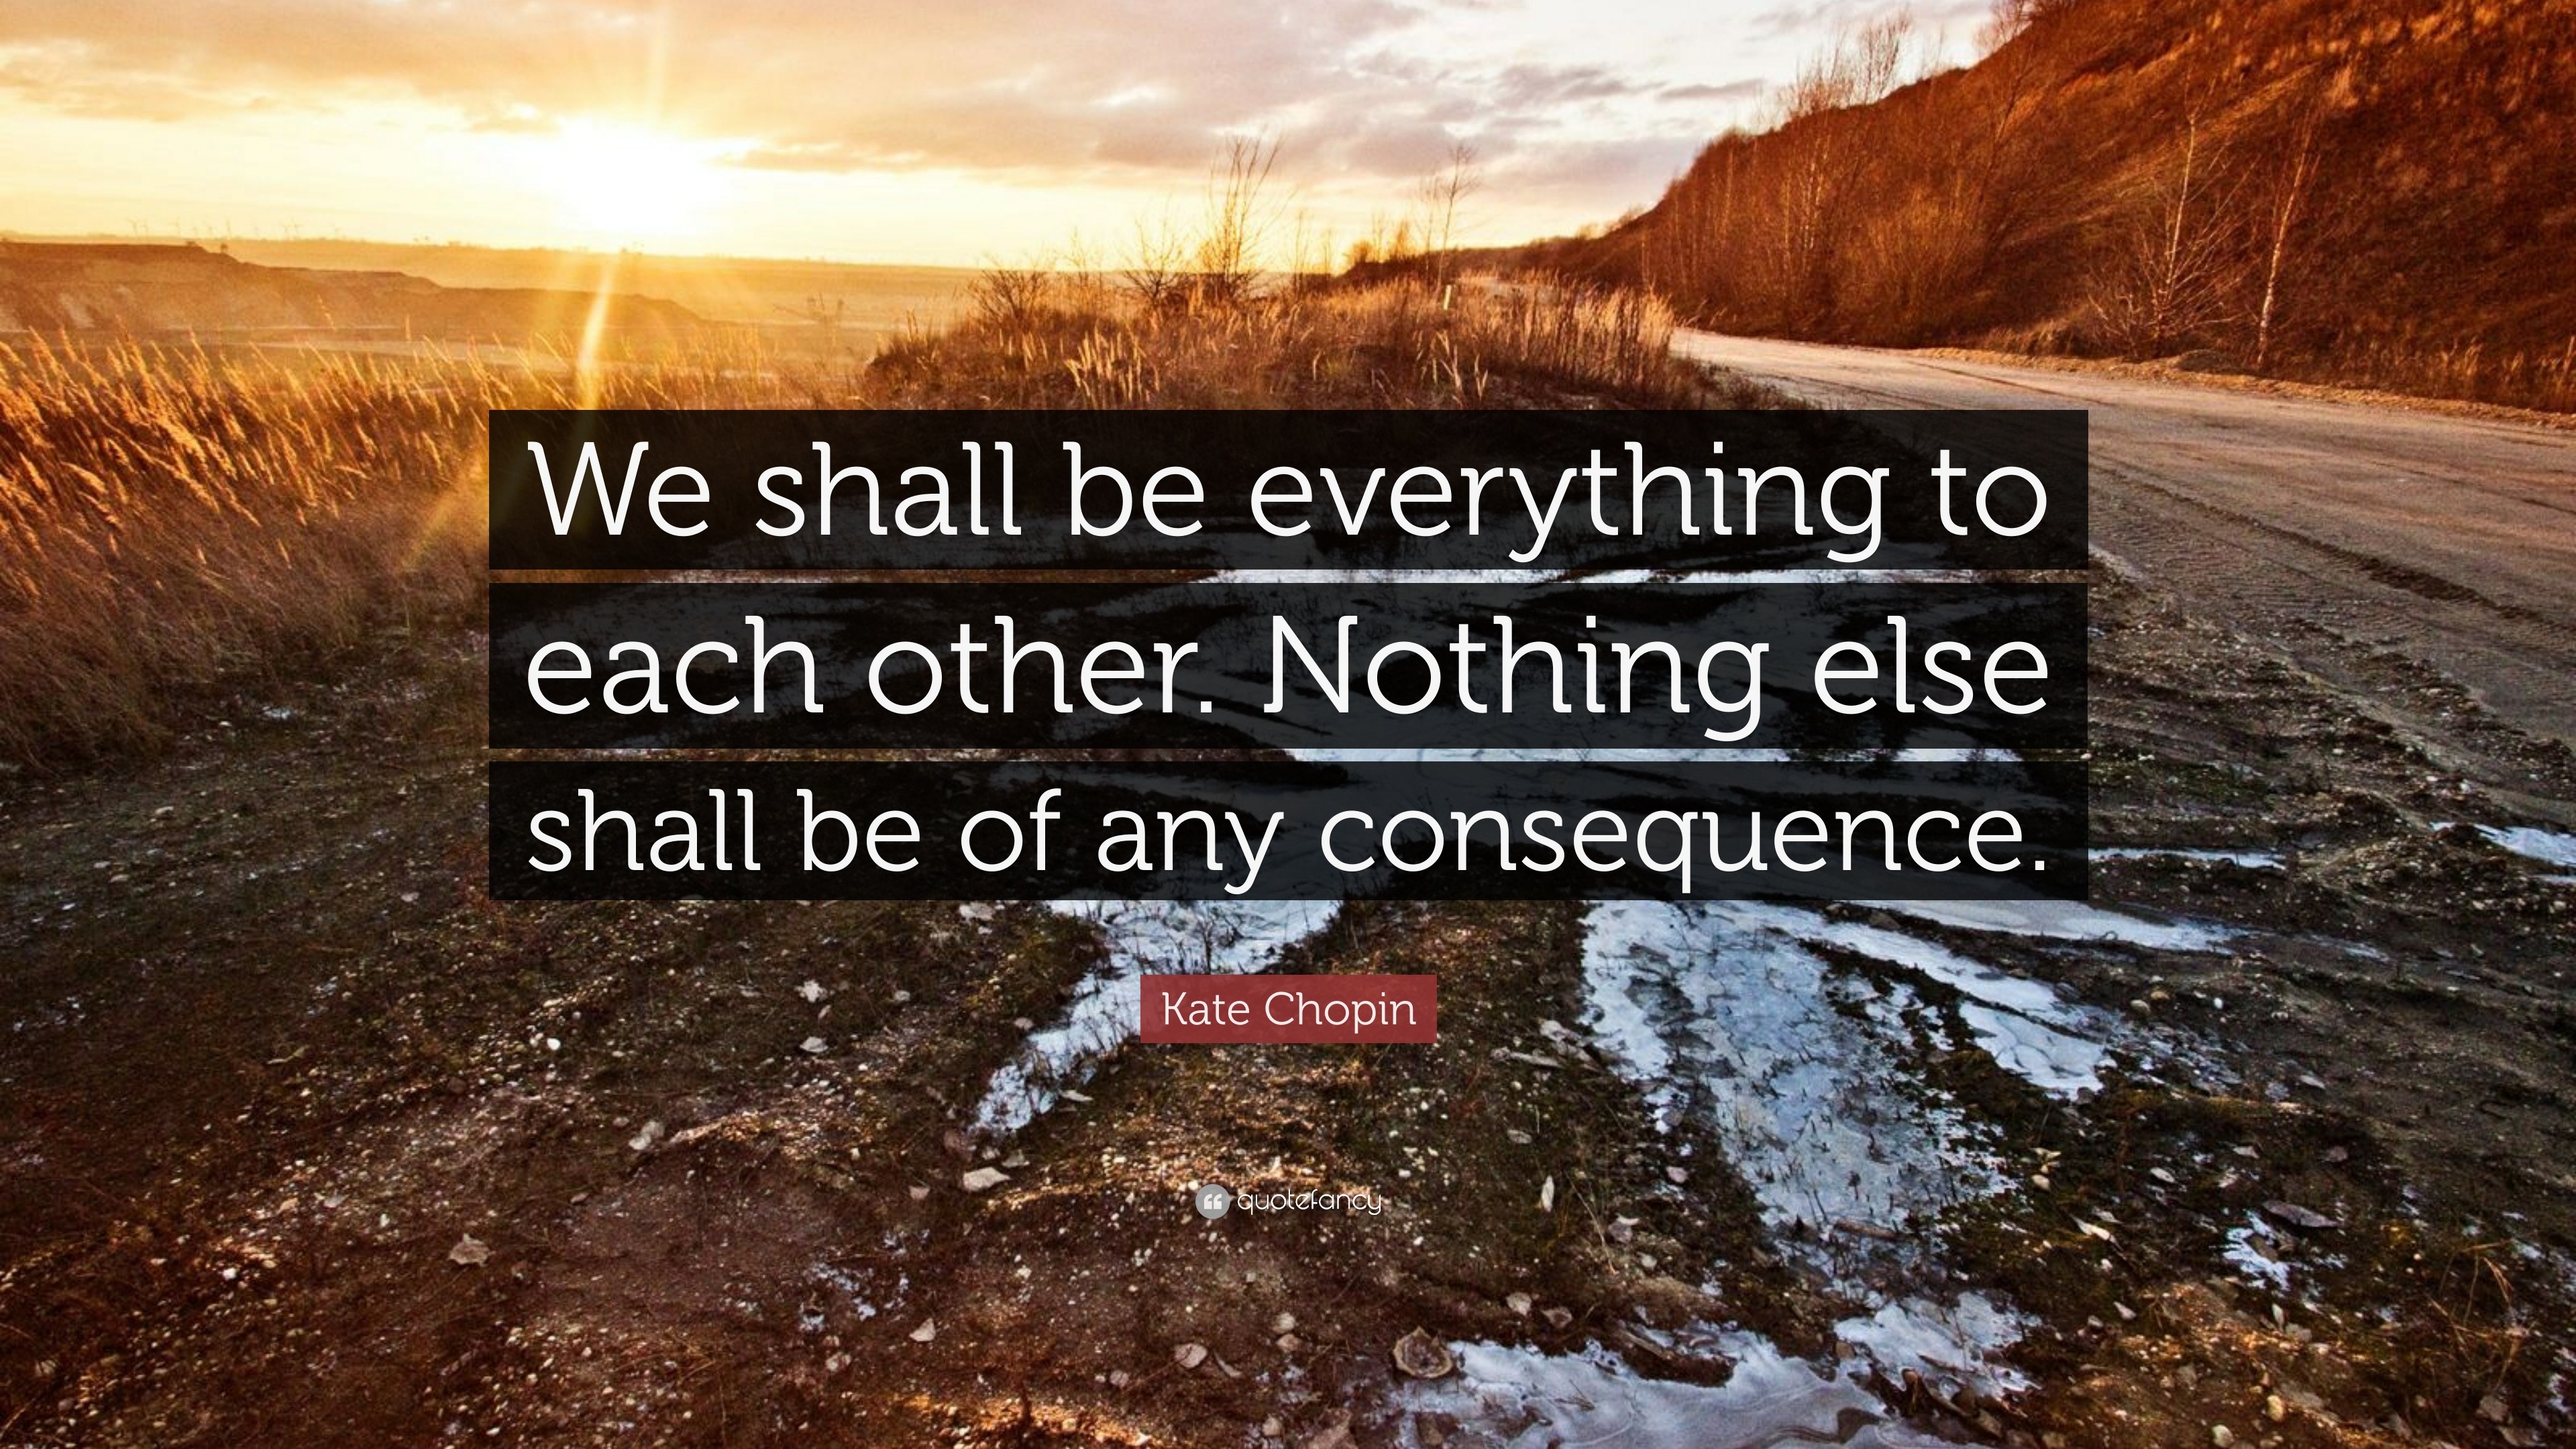 Kate Chopin Quote “We shall be everything to each other. Nothing else